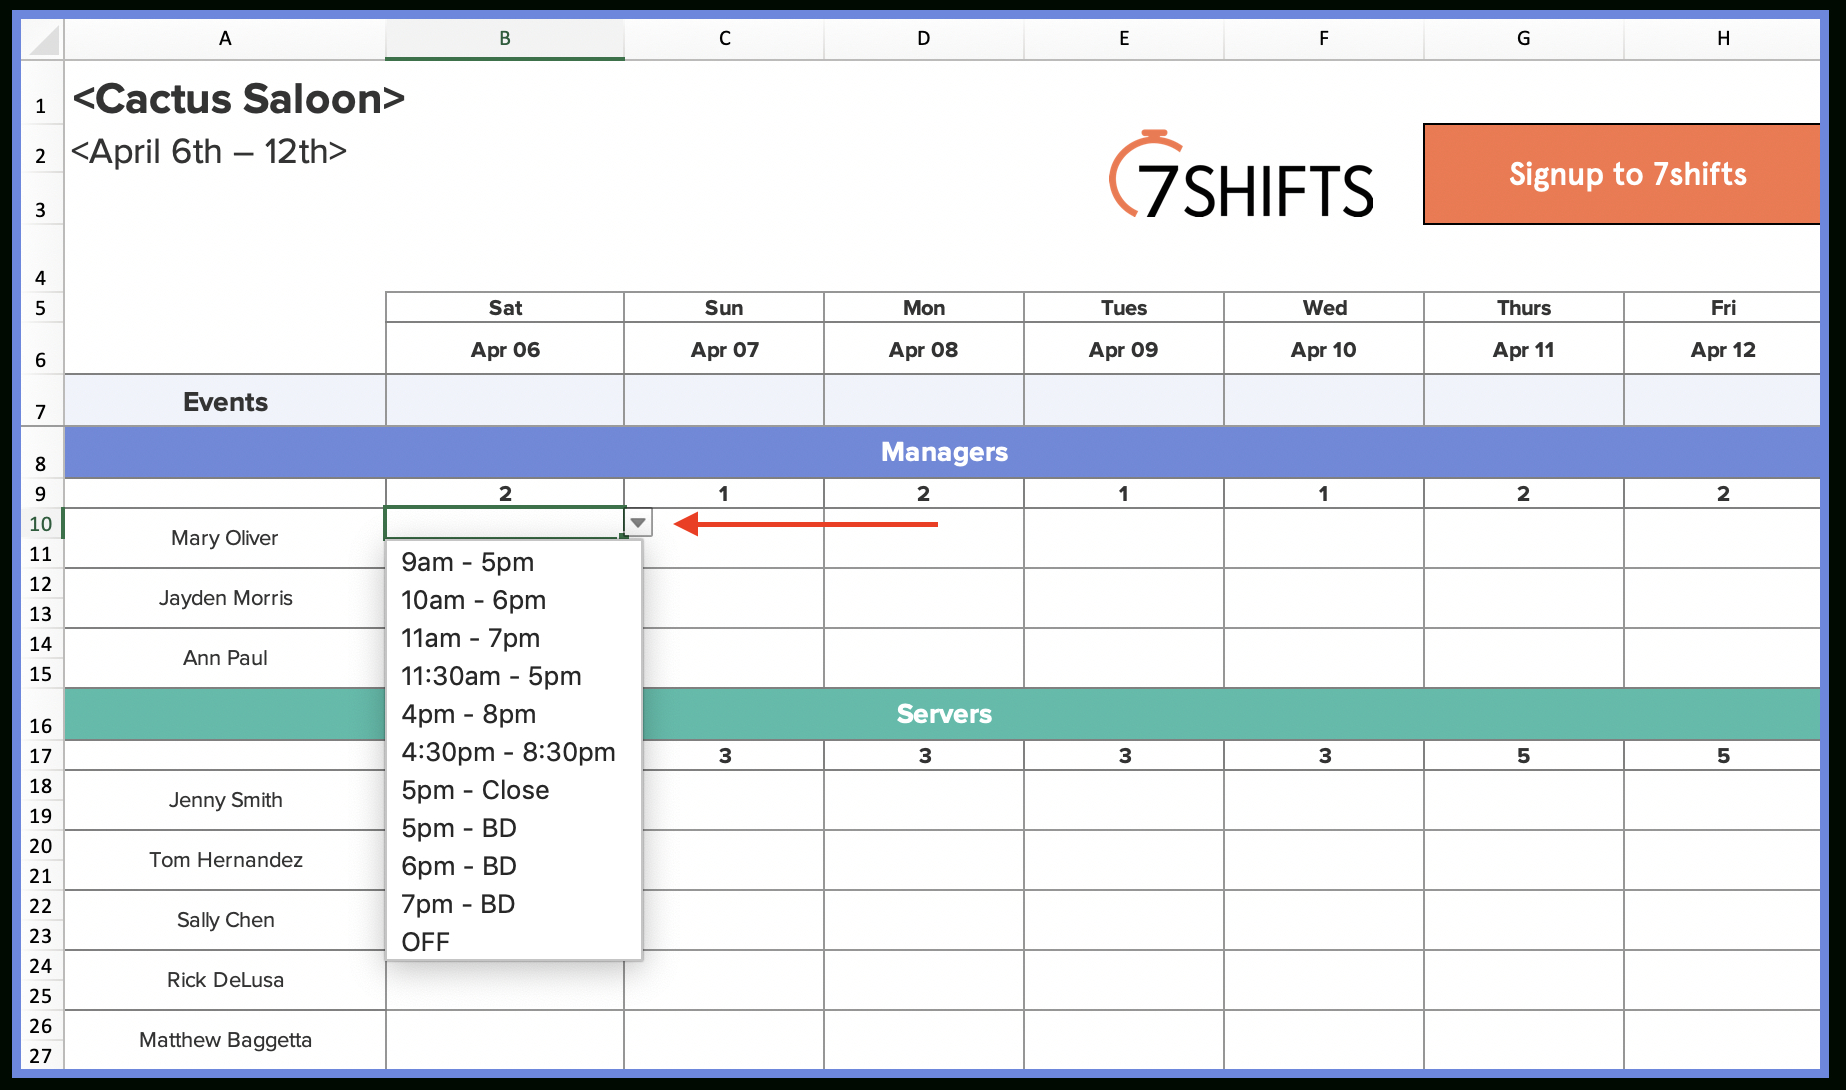 Excel Spreadsheet For Scheduling Employee Shifts